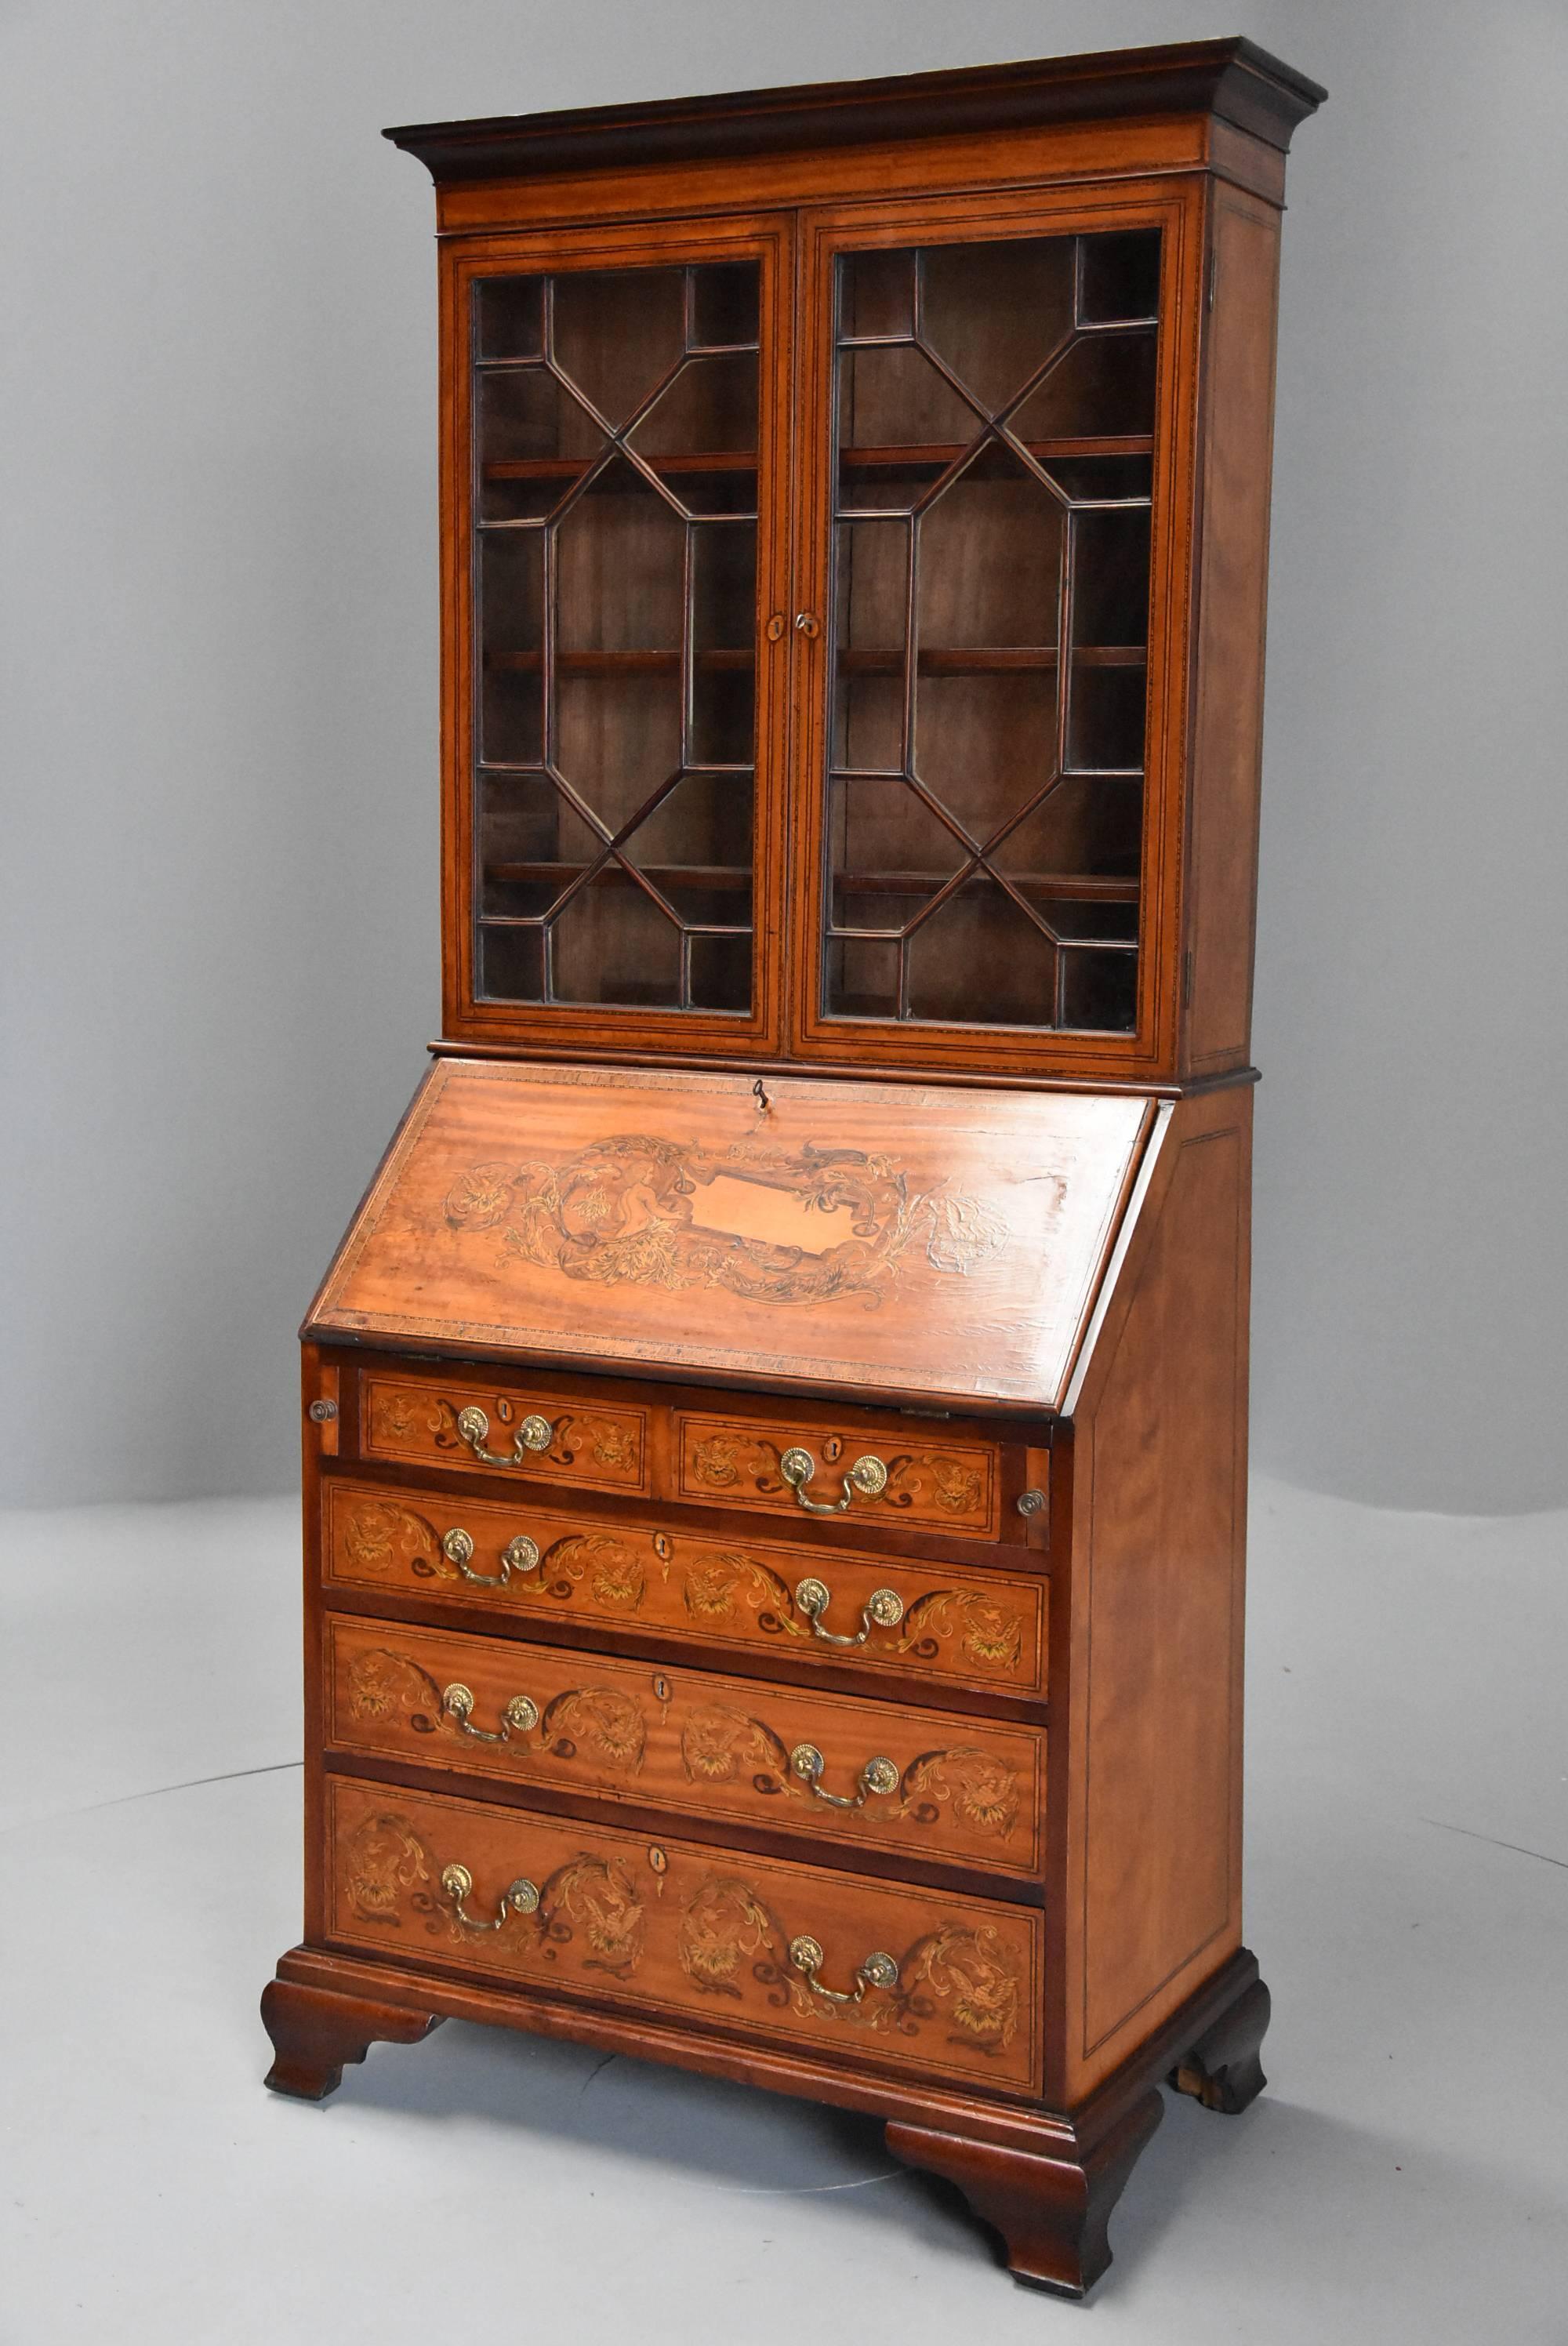 An unusual late 19th-early 20th century satinwood, mahogany and marquetry inlaid bureau bookcase of small proportions.

The top section consists of a satinwood and mahogany moulded cornice leading down to a satinwood frieze with boxwood and ebony